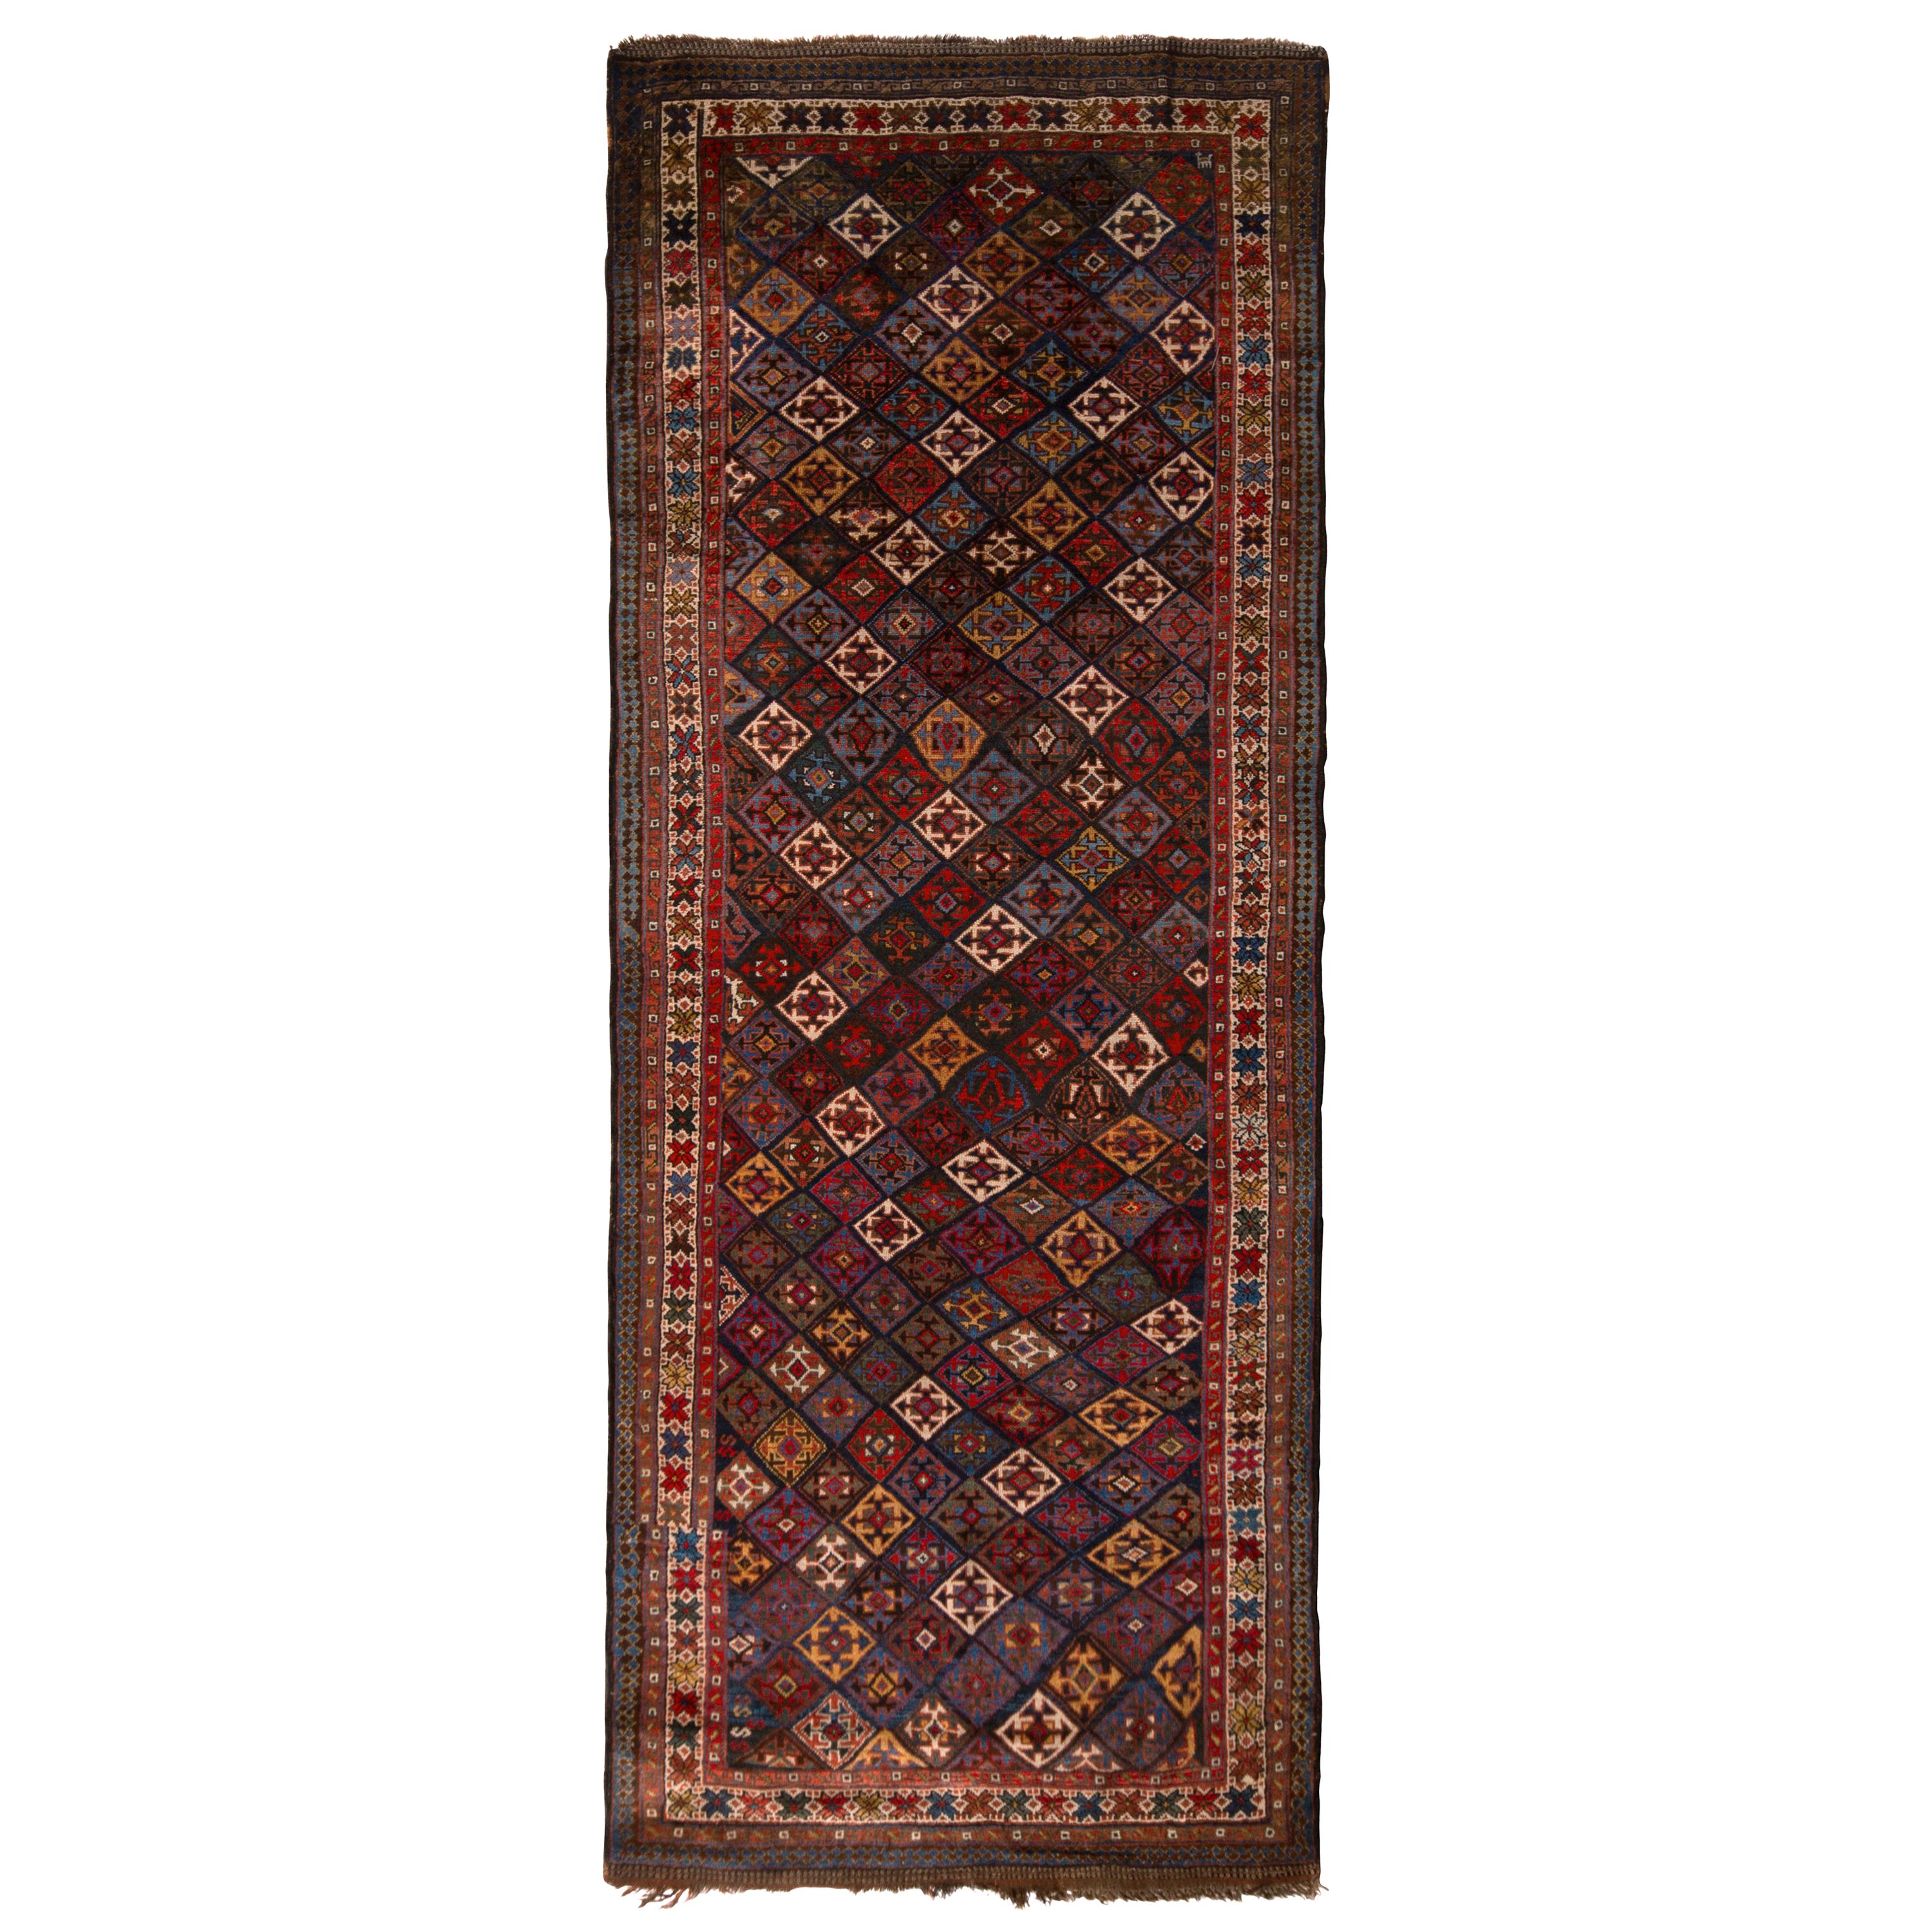 Antique Kurdish Rug Red and Blue Persian Tribal Pattern